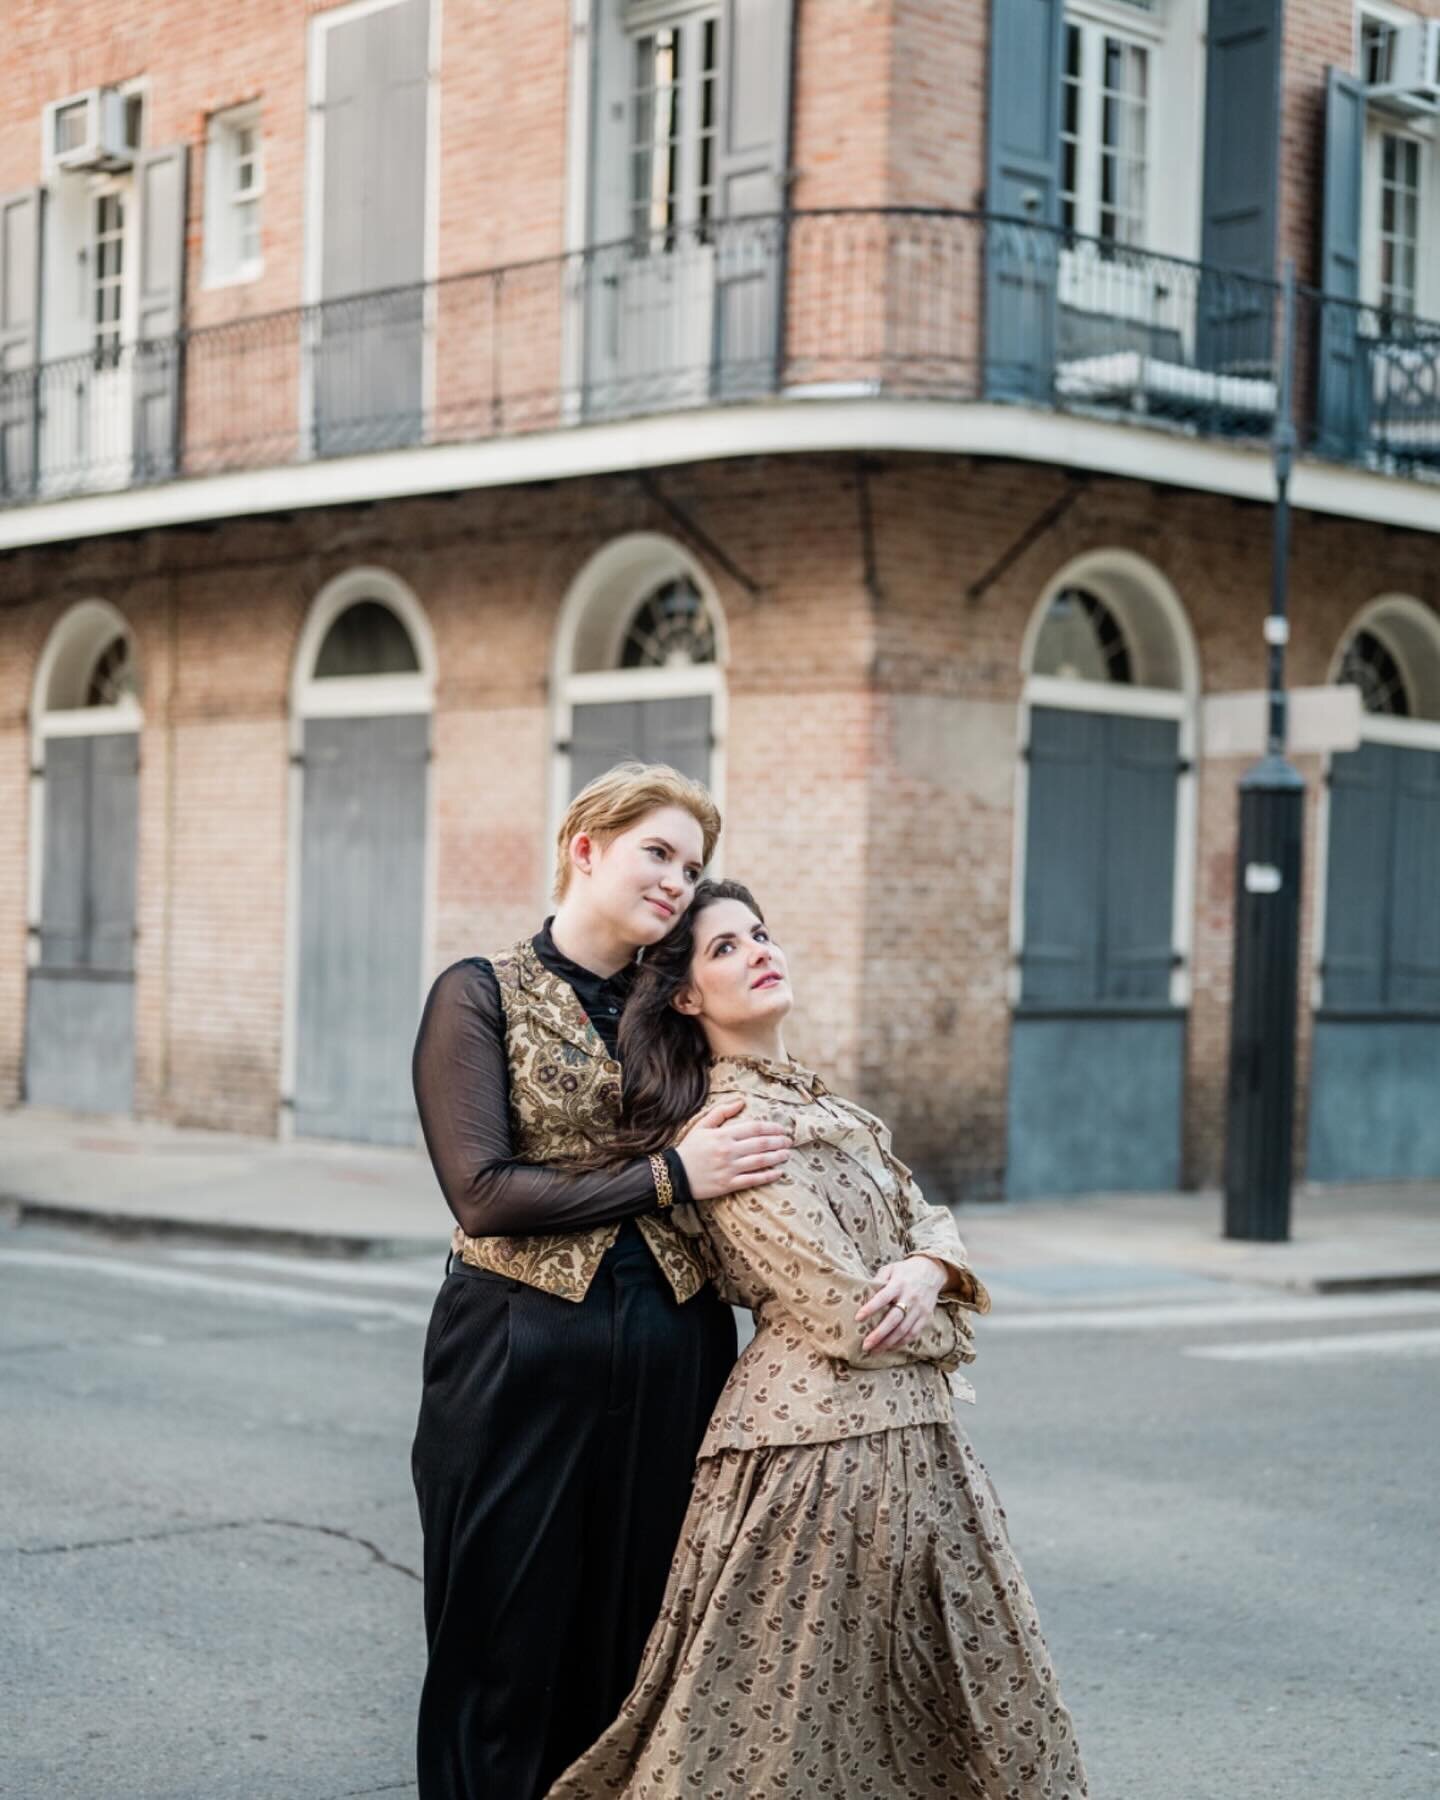 Two of my favorite vampires from their annual trip east giving their best Jack and Rose mid French Quarter gallivant in amazing authentic vintage clothing. ⁣
⁣
Their fits never disappoint and neither do our photo adventures together. Thanks for choos